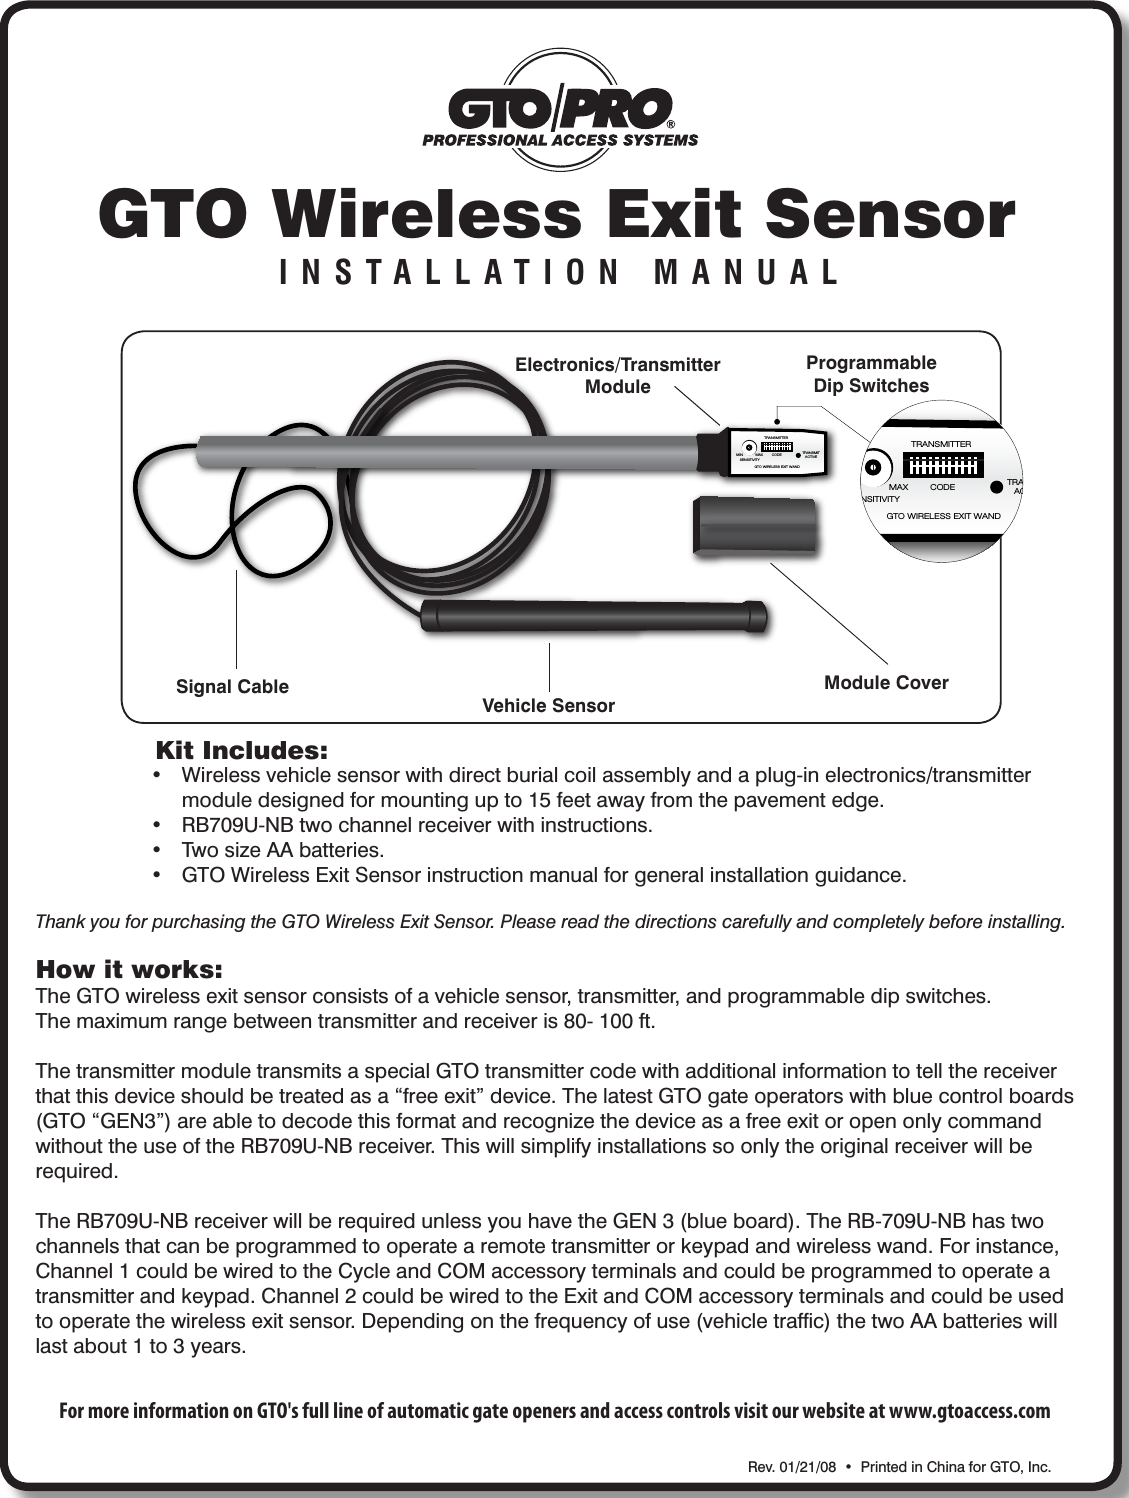 GTO Wireless Exit SensorINSTALLATION MANUALKit Includes:• Wirelessvehiclesensorwithdirectburialcoilassemblyandaplug-inelectronics/transmitter moduledesignedformountingupto15feetawayfromthepavementedge.• RB709U-NBtwochannelreceiverwithinstructions.• TwosizeAAbatteries.• GTOWirelessExitSensorinstructionmanualforgeneralinstallationguidance.Rev.01/21/08•PrintedinChinaforGTO,Inc.Signal CableVehicle SensorModule CoverElectronics/TransmitterModuleProgrammableDip SwitchesHow it works:TheGTOwirelessexitsensorconsistsofavehiclesensor,transmitter,andprogrammabledipswitches.Themaximumrangebetweentransmitterandreceiveris80-100ft.ThetransmittermoduletransmitsaspecialGTOtransmittercodewithadditionalinformationtotellthereceiverthatthisdeviceshouldbetreatedasa“freeexit”device.ThelatestGTOgateoperatorswithbluecontrolboards(GTO“GEN3”)areabletodecodethisformatandrecognizethedeviceasafreeexitoropenonlycommandwithouttheuseoftheRB709U-NBreceiver.Thiswillsimplifyinstallationssoonlytheoriginalreceiverwillberequired.TheRB709U-NBreceiverwillberequiredunlessyouhavetheGEN3(blueboard).TheRB-709U-NBhastwochannelsthatcanbeprogrammedtooperatearemotetransmitterorkeypadandwirelesswand.Forinstance,Channel1couldbewiredtotheCycleandCOMaccessoryterminalsandcouldbeprogrammedtooperateatransmitterandkeypad.Channel2couldbewiredtotheExitandCOMaccessoryterminalsandcouldbeusedtooperatethewirelessexitsensor.Dependingonthefrequencyofuse(vehicletrafc)thetwoAAbatterieswilllastabout1to3years.Thank you for purchasing the GTO Wireless Exit Sensor. Please read the directions carefully and completely before installing.For more information on GTO&apos;s full line of automatic gate openers and access controls visit our website at www.gtoaccess.comGTO WIRELESS EXIT WANDTRANSMITTERCODE TRANSMITACTIVEMIN MAXSENSITIVITYGTO WIRELESS EXIT WANDTRANSMITTERCODE TRANSMITACTIVEMIN MAXSENSITIVITY